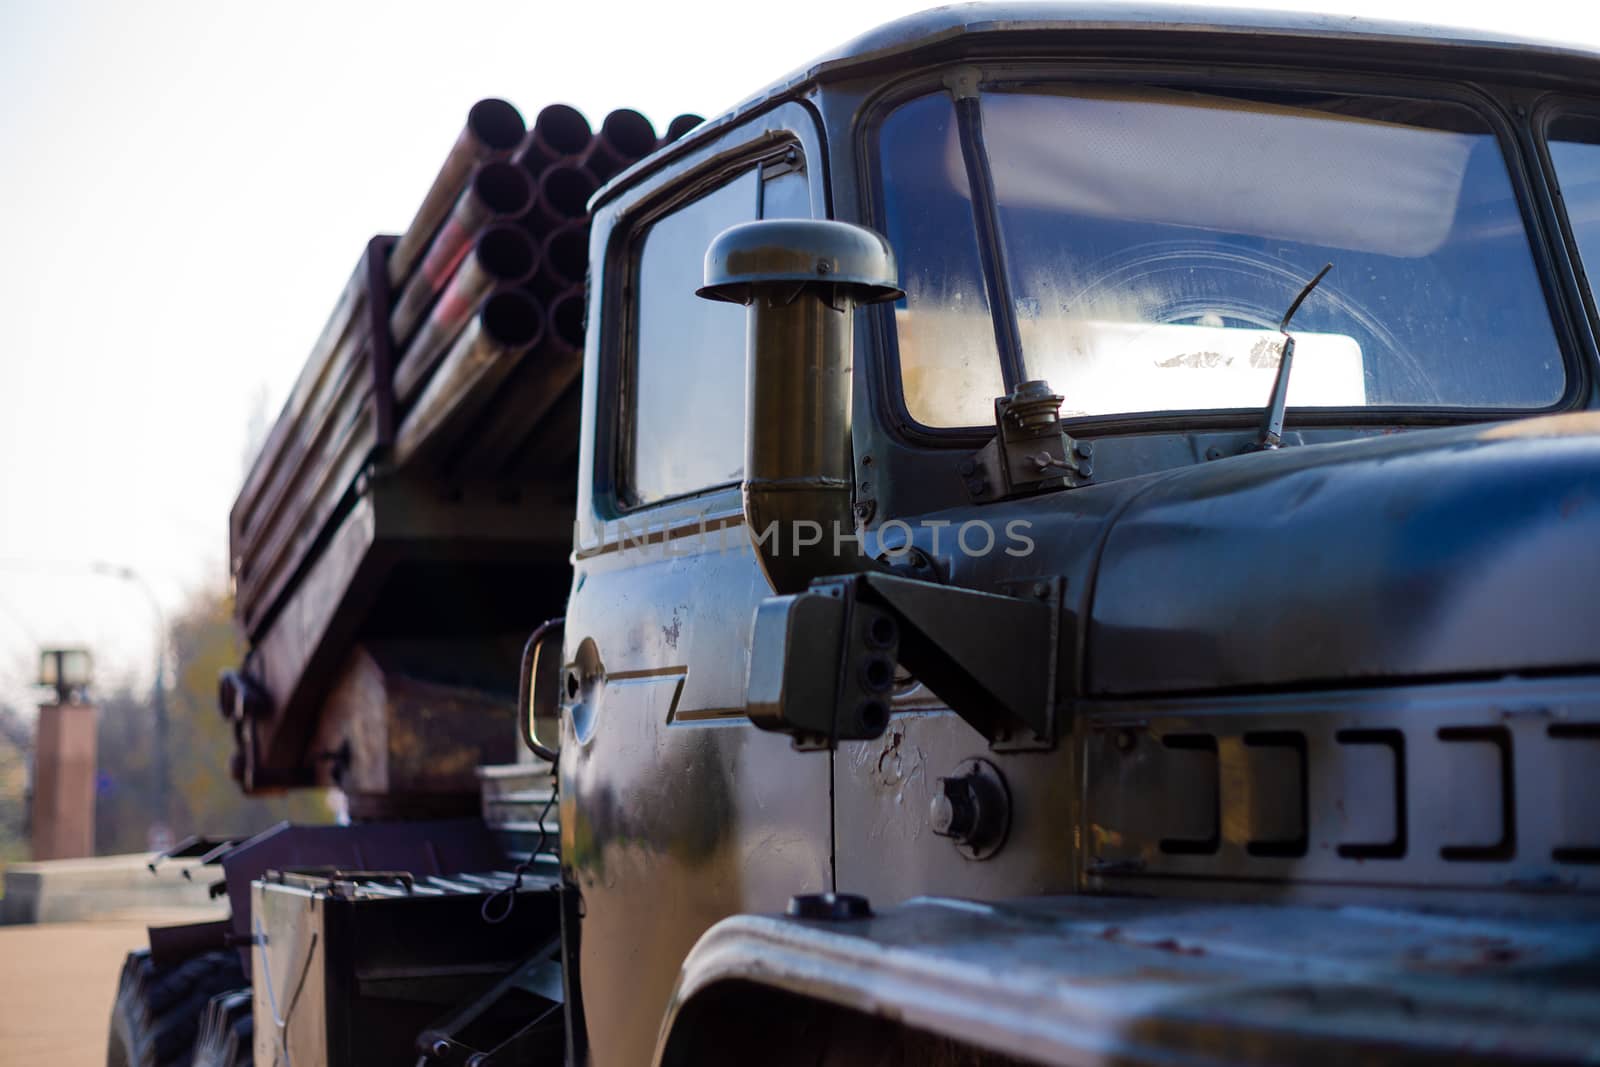 Camouflage military truck with rocket launcher. Outdoor military vehicles museum. Armor is damaged at the battlefield.